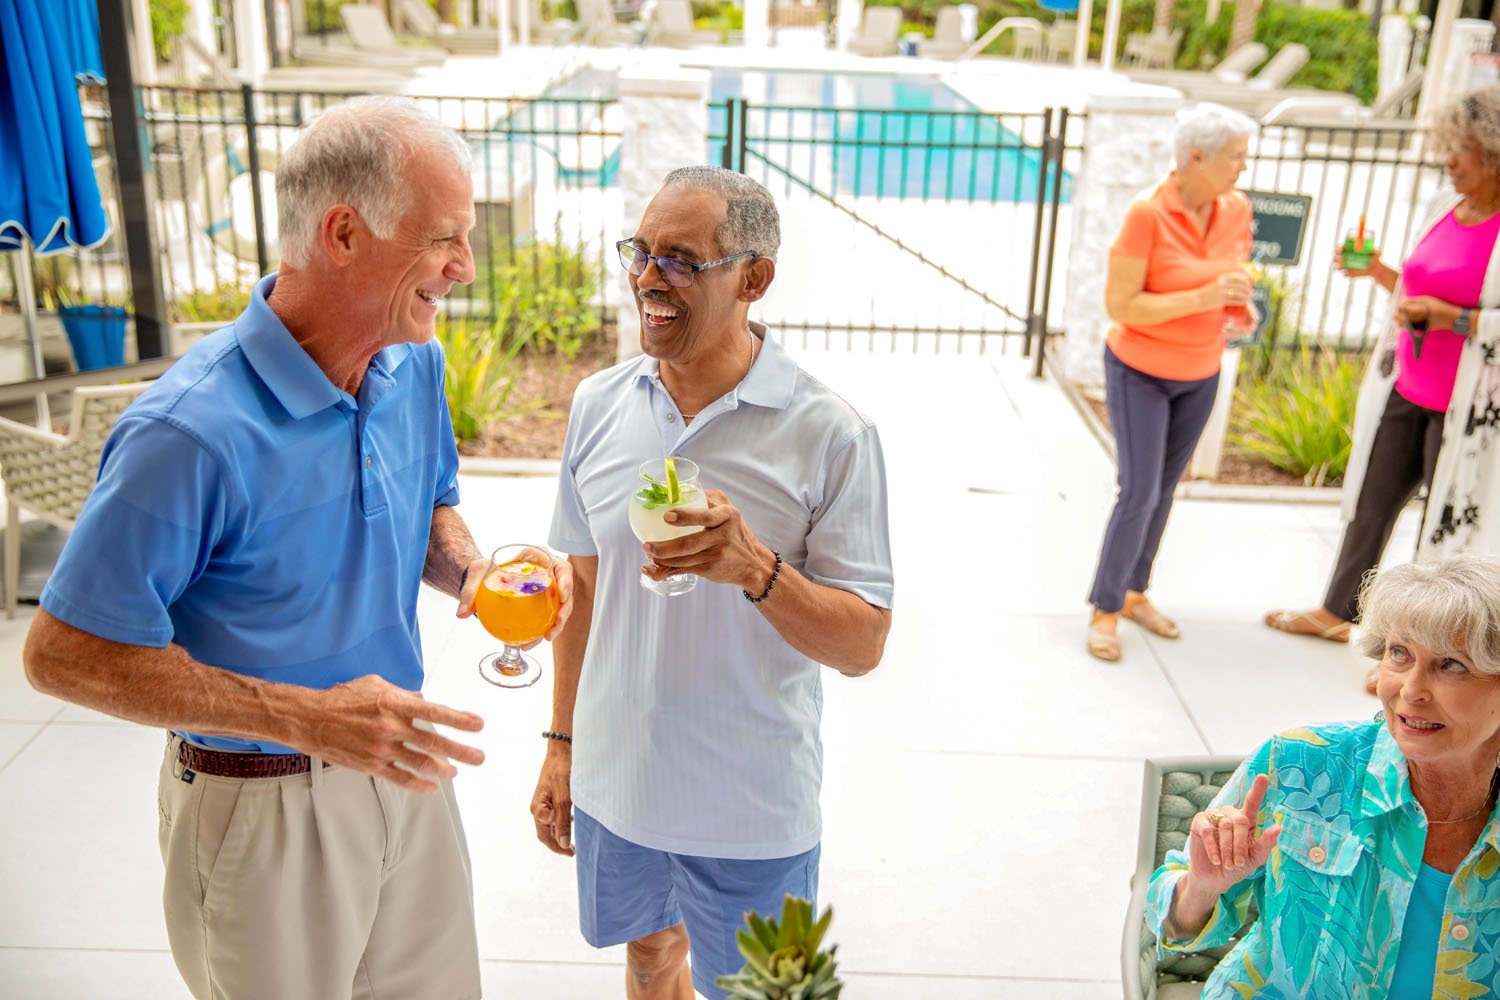 arbor terrace residents at pool party